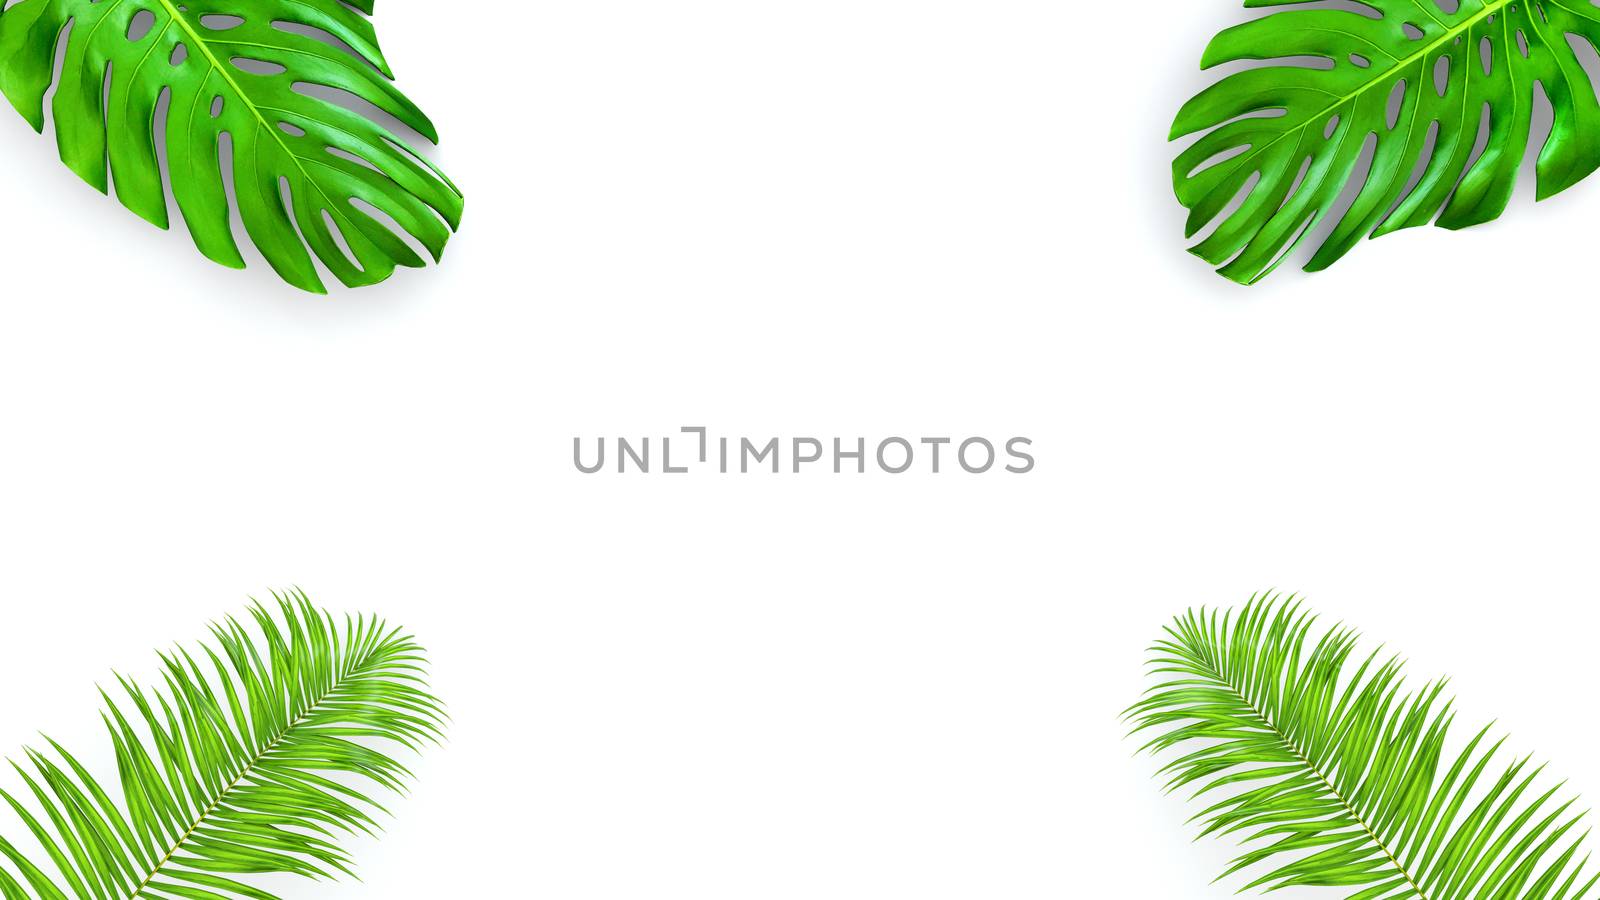 3D render of realistic palm leaves on white background for cosmetic ad or fashion illustration. Tropical frame exotic banana palm. by Shanvood